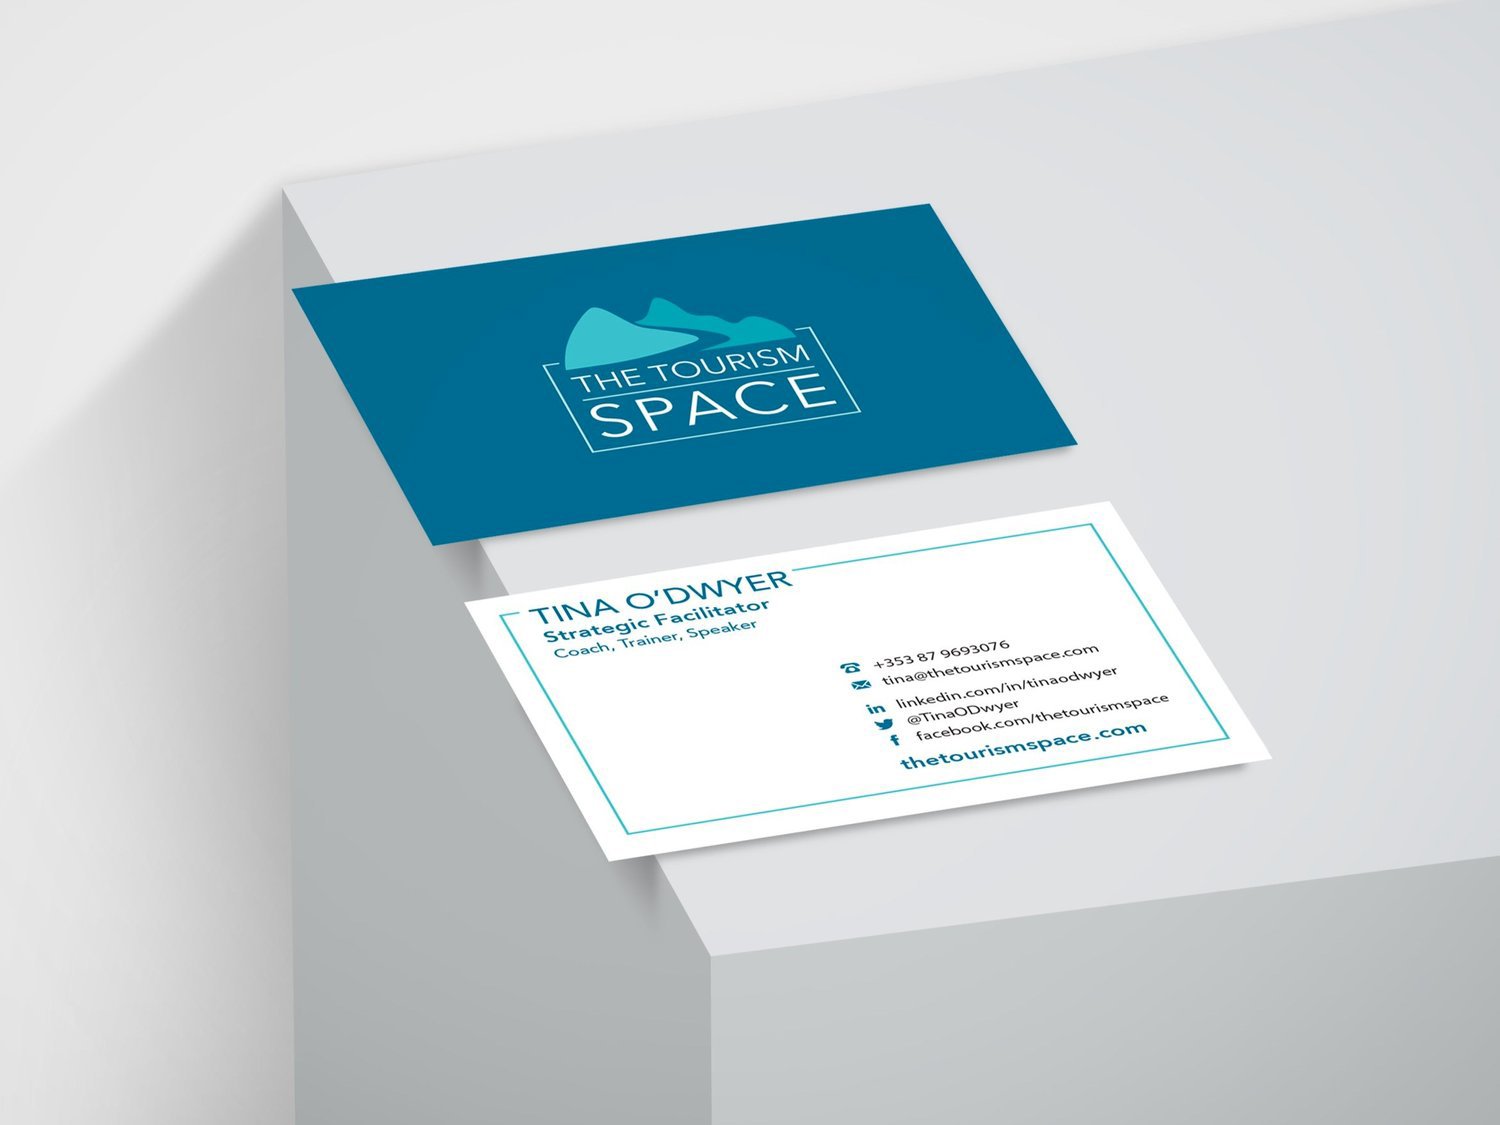 Tourism Space GALLERY_businesscard.jpg